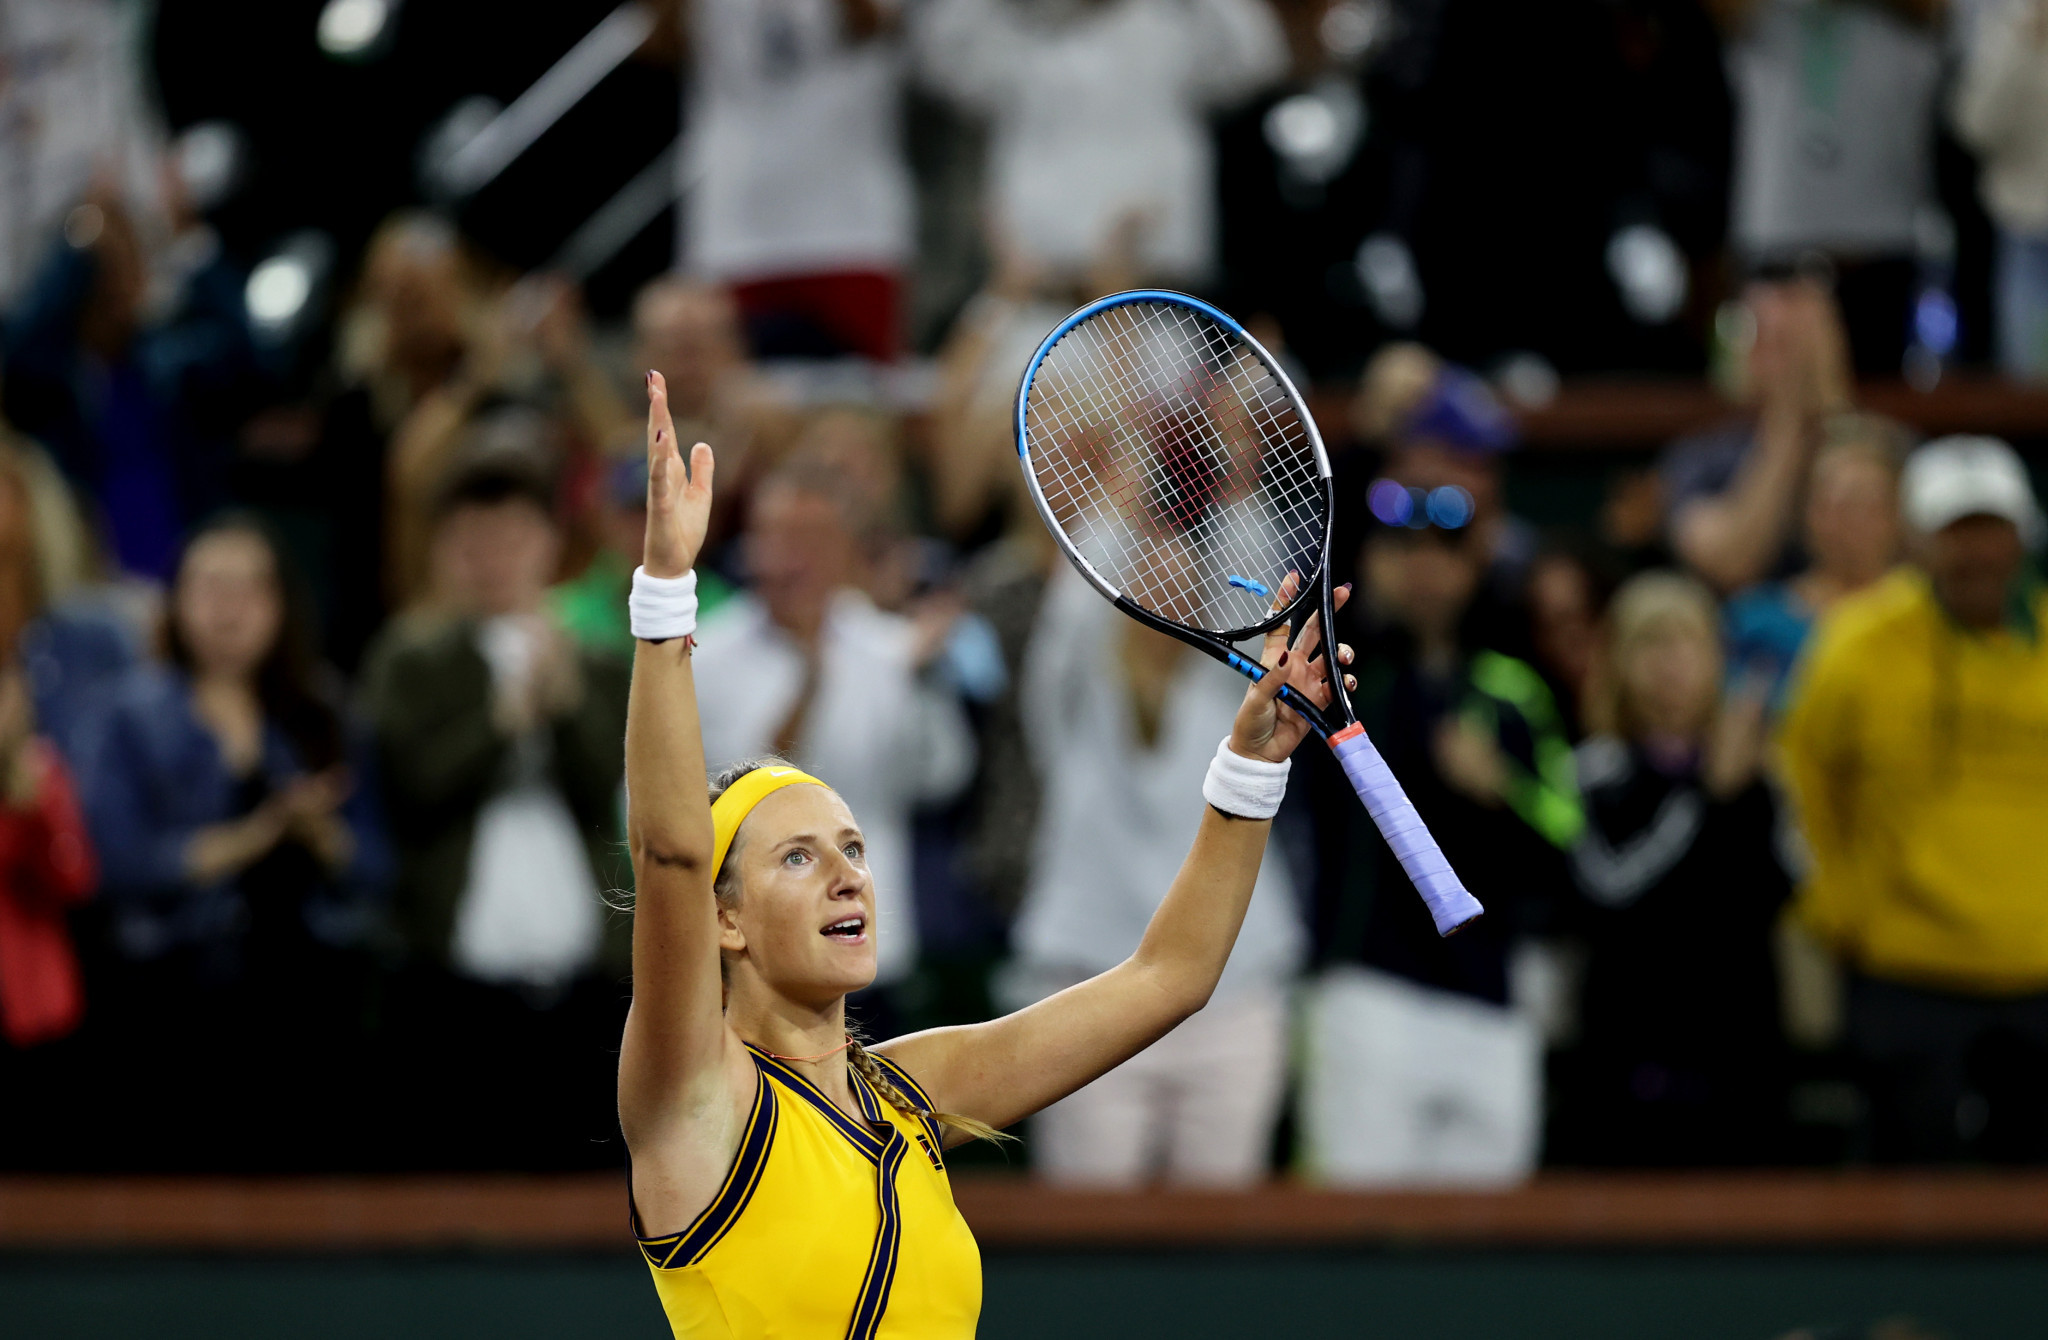 Victoria Azarenka would become the first woman to win the Indian Wells Masters three times if she triumphs in Sunday's final against Paula Badosa ©Getty Images